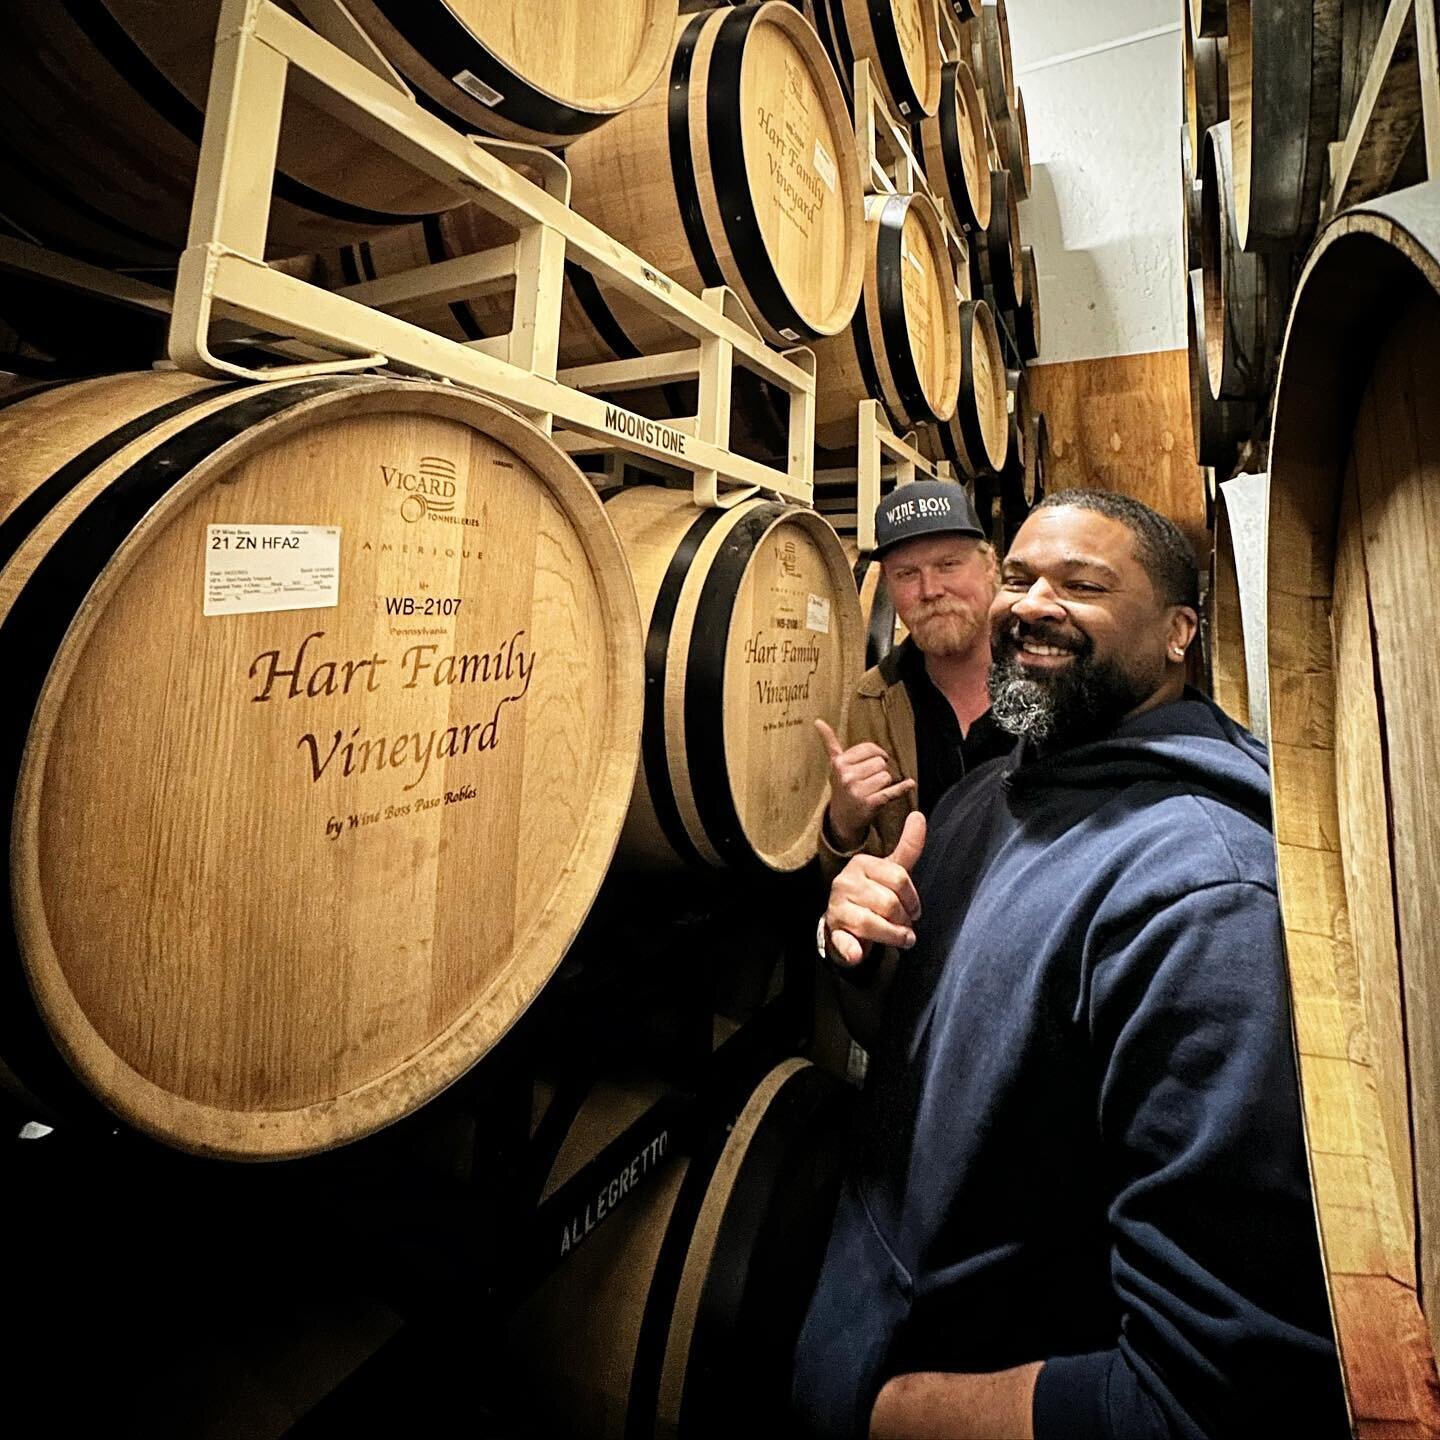 Had the ultimate pleasure of meeting with renowned sommelier, DLynn Proctor, to taste through the Hart Family wines. I have a tremendous passion for this project and his amazing feedback meant the world. DLynn is featured throughout the documentary s